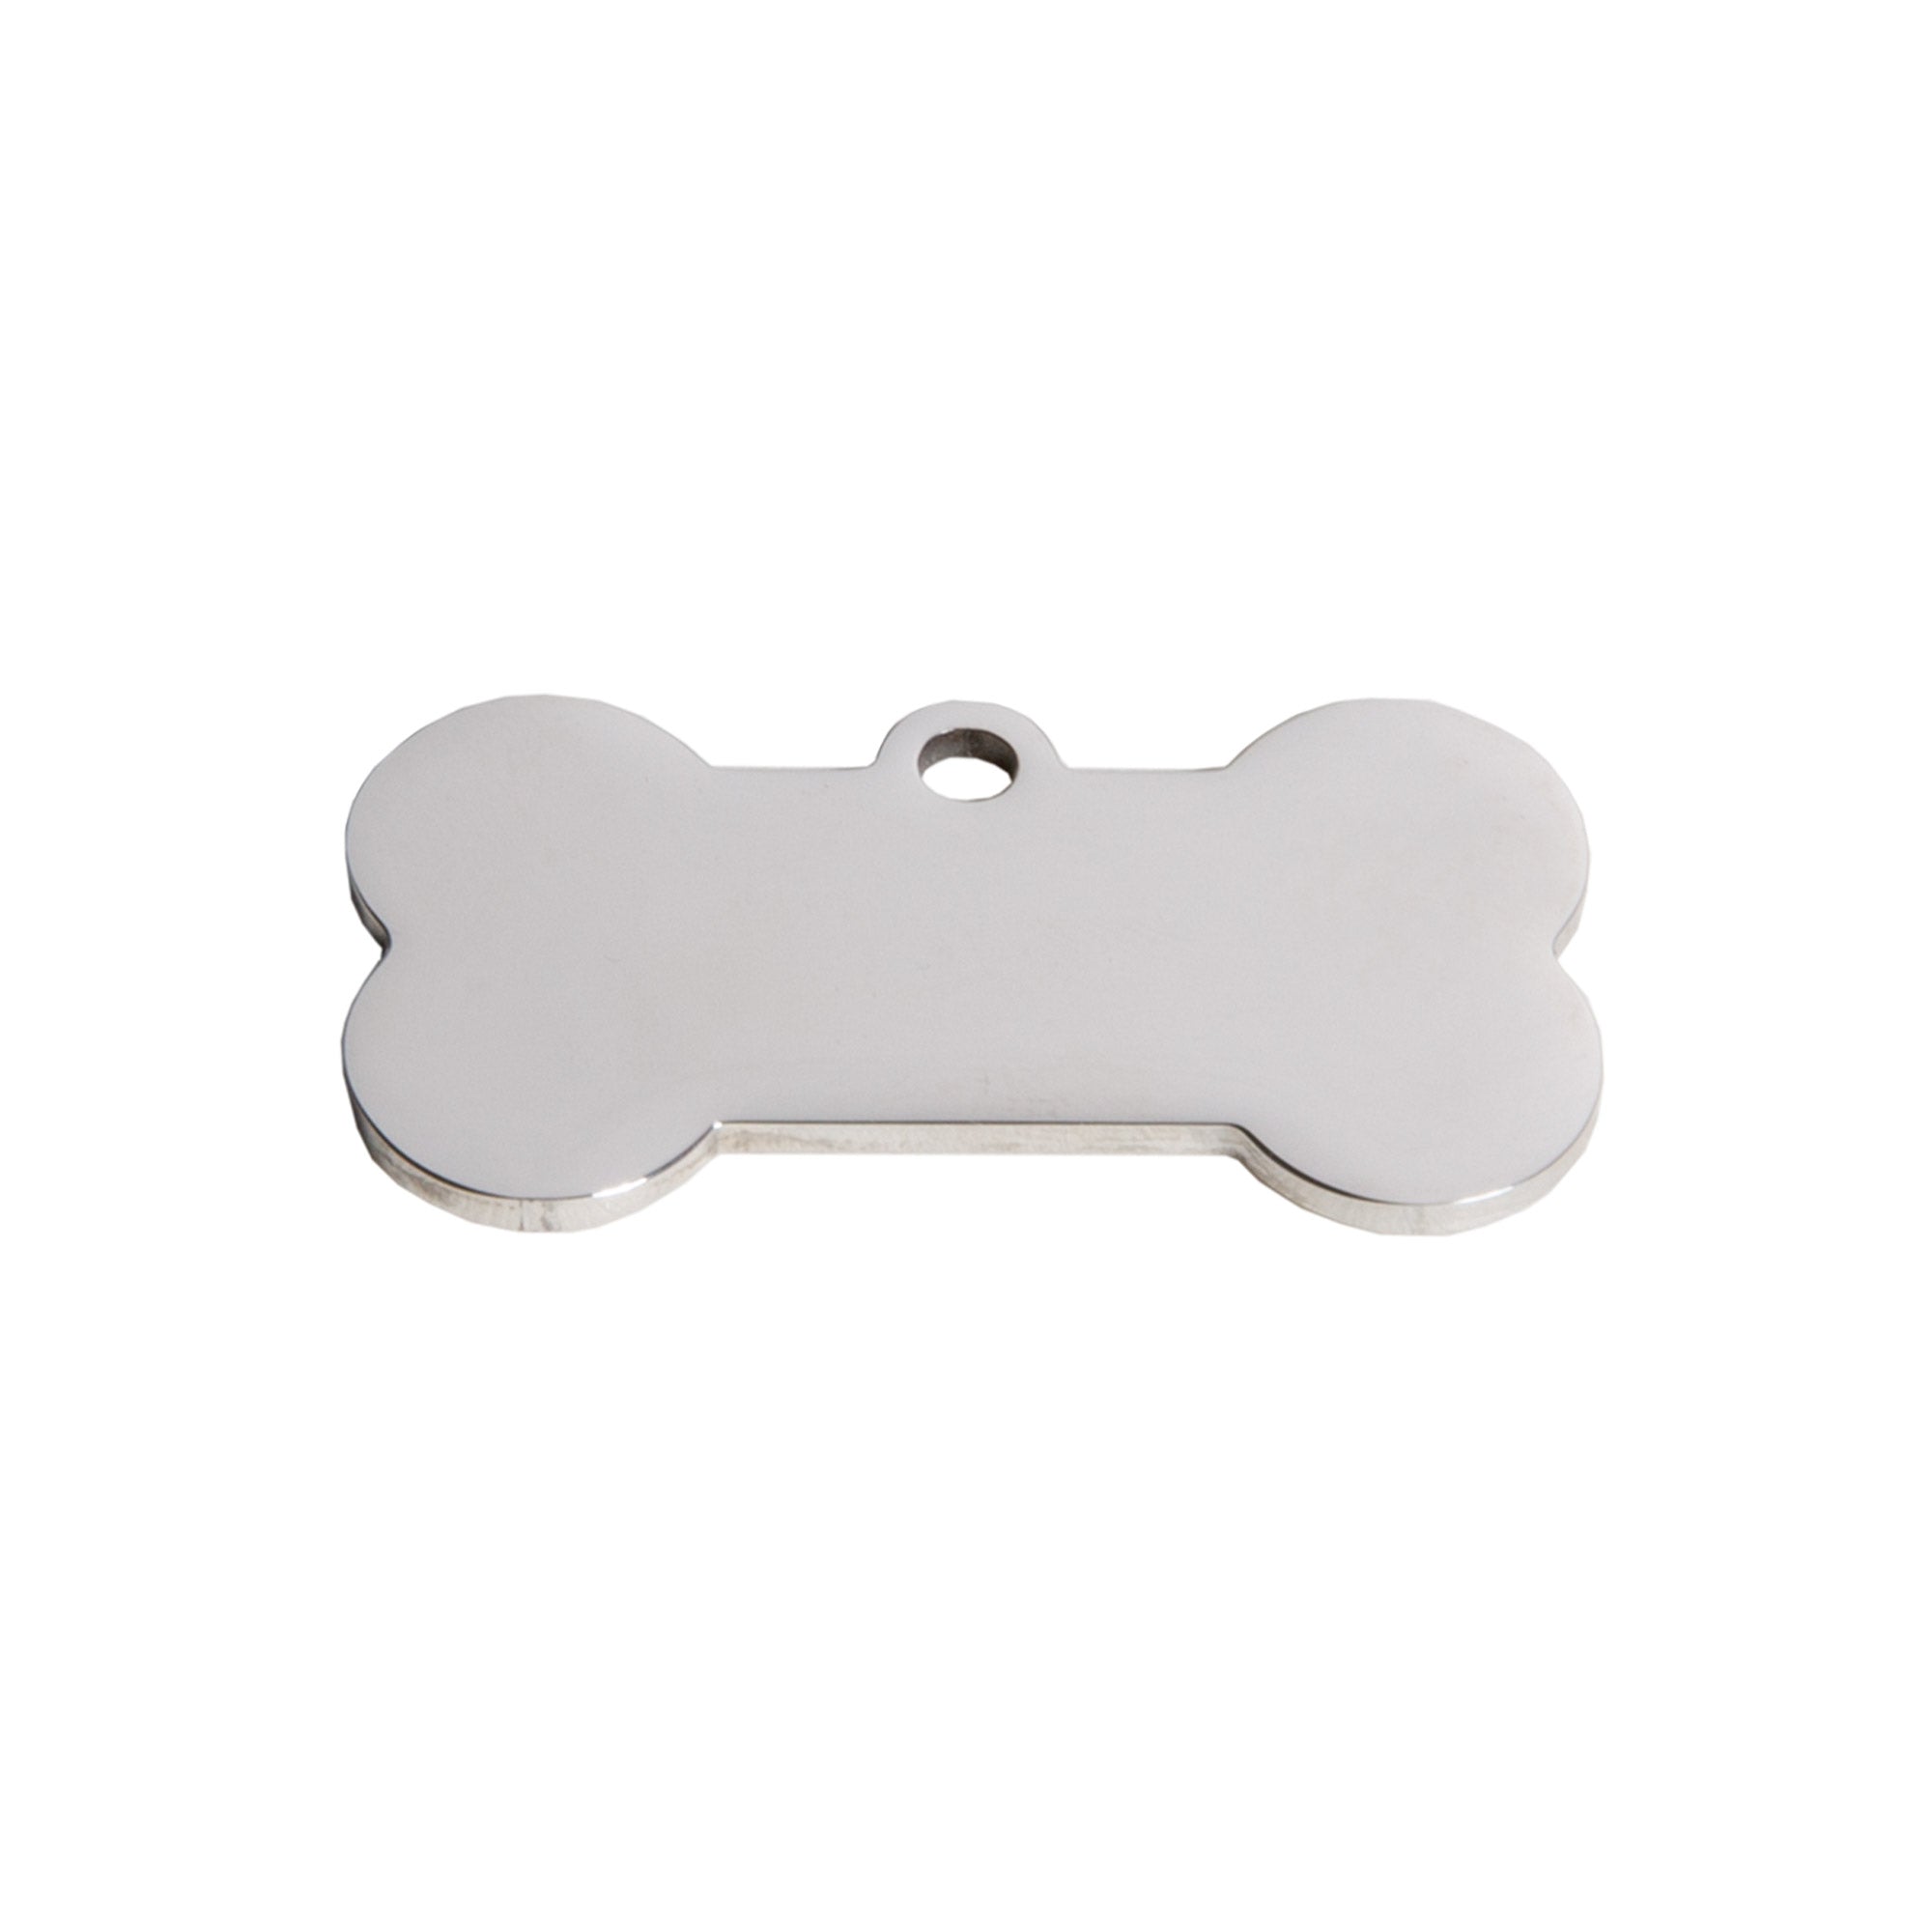 Stainless Steel Dog Tag for Laser Engraving (10pcs)